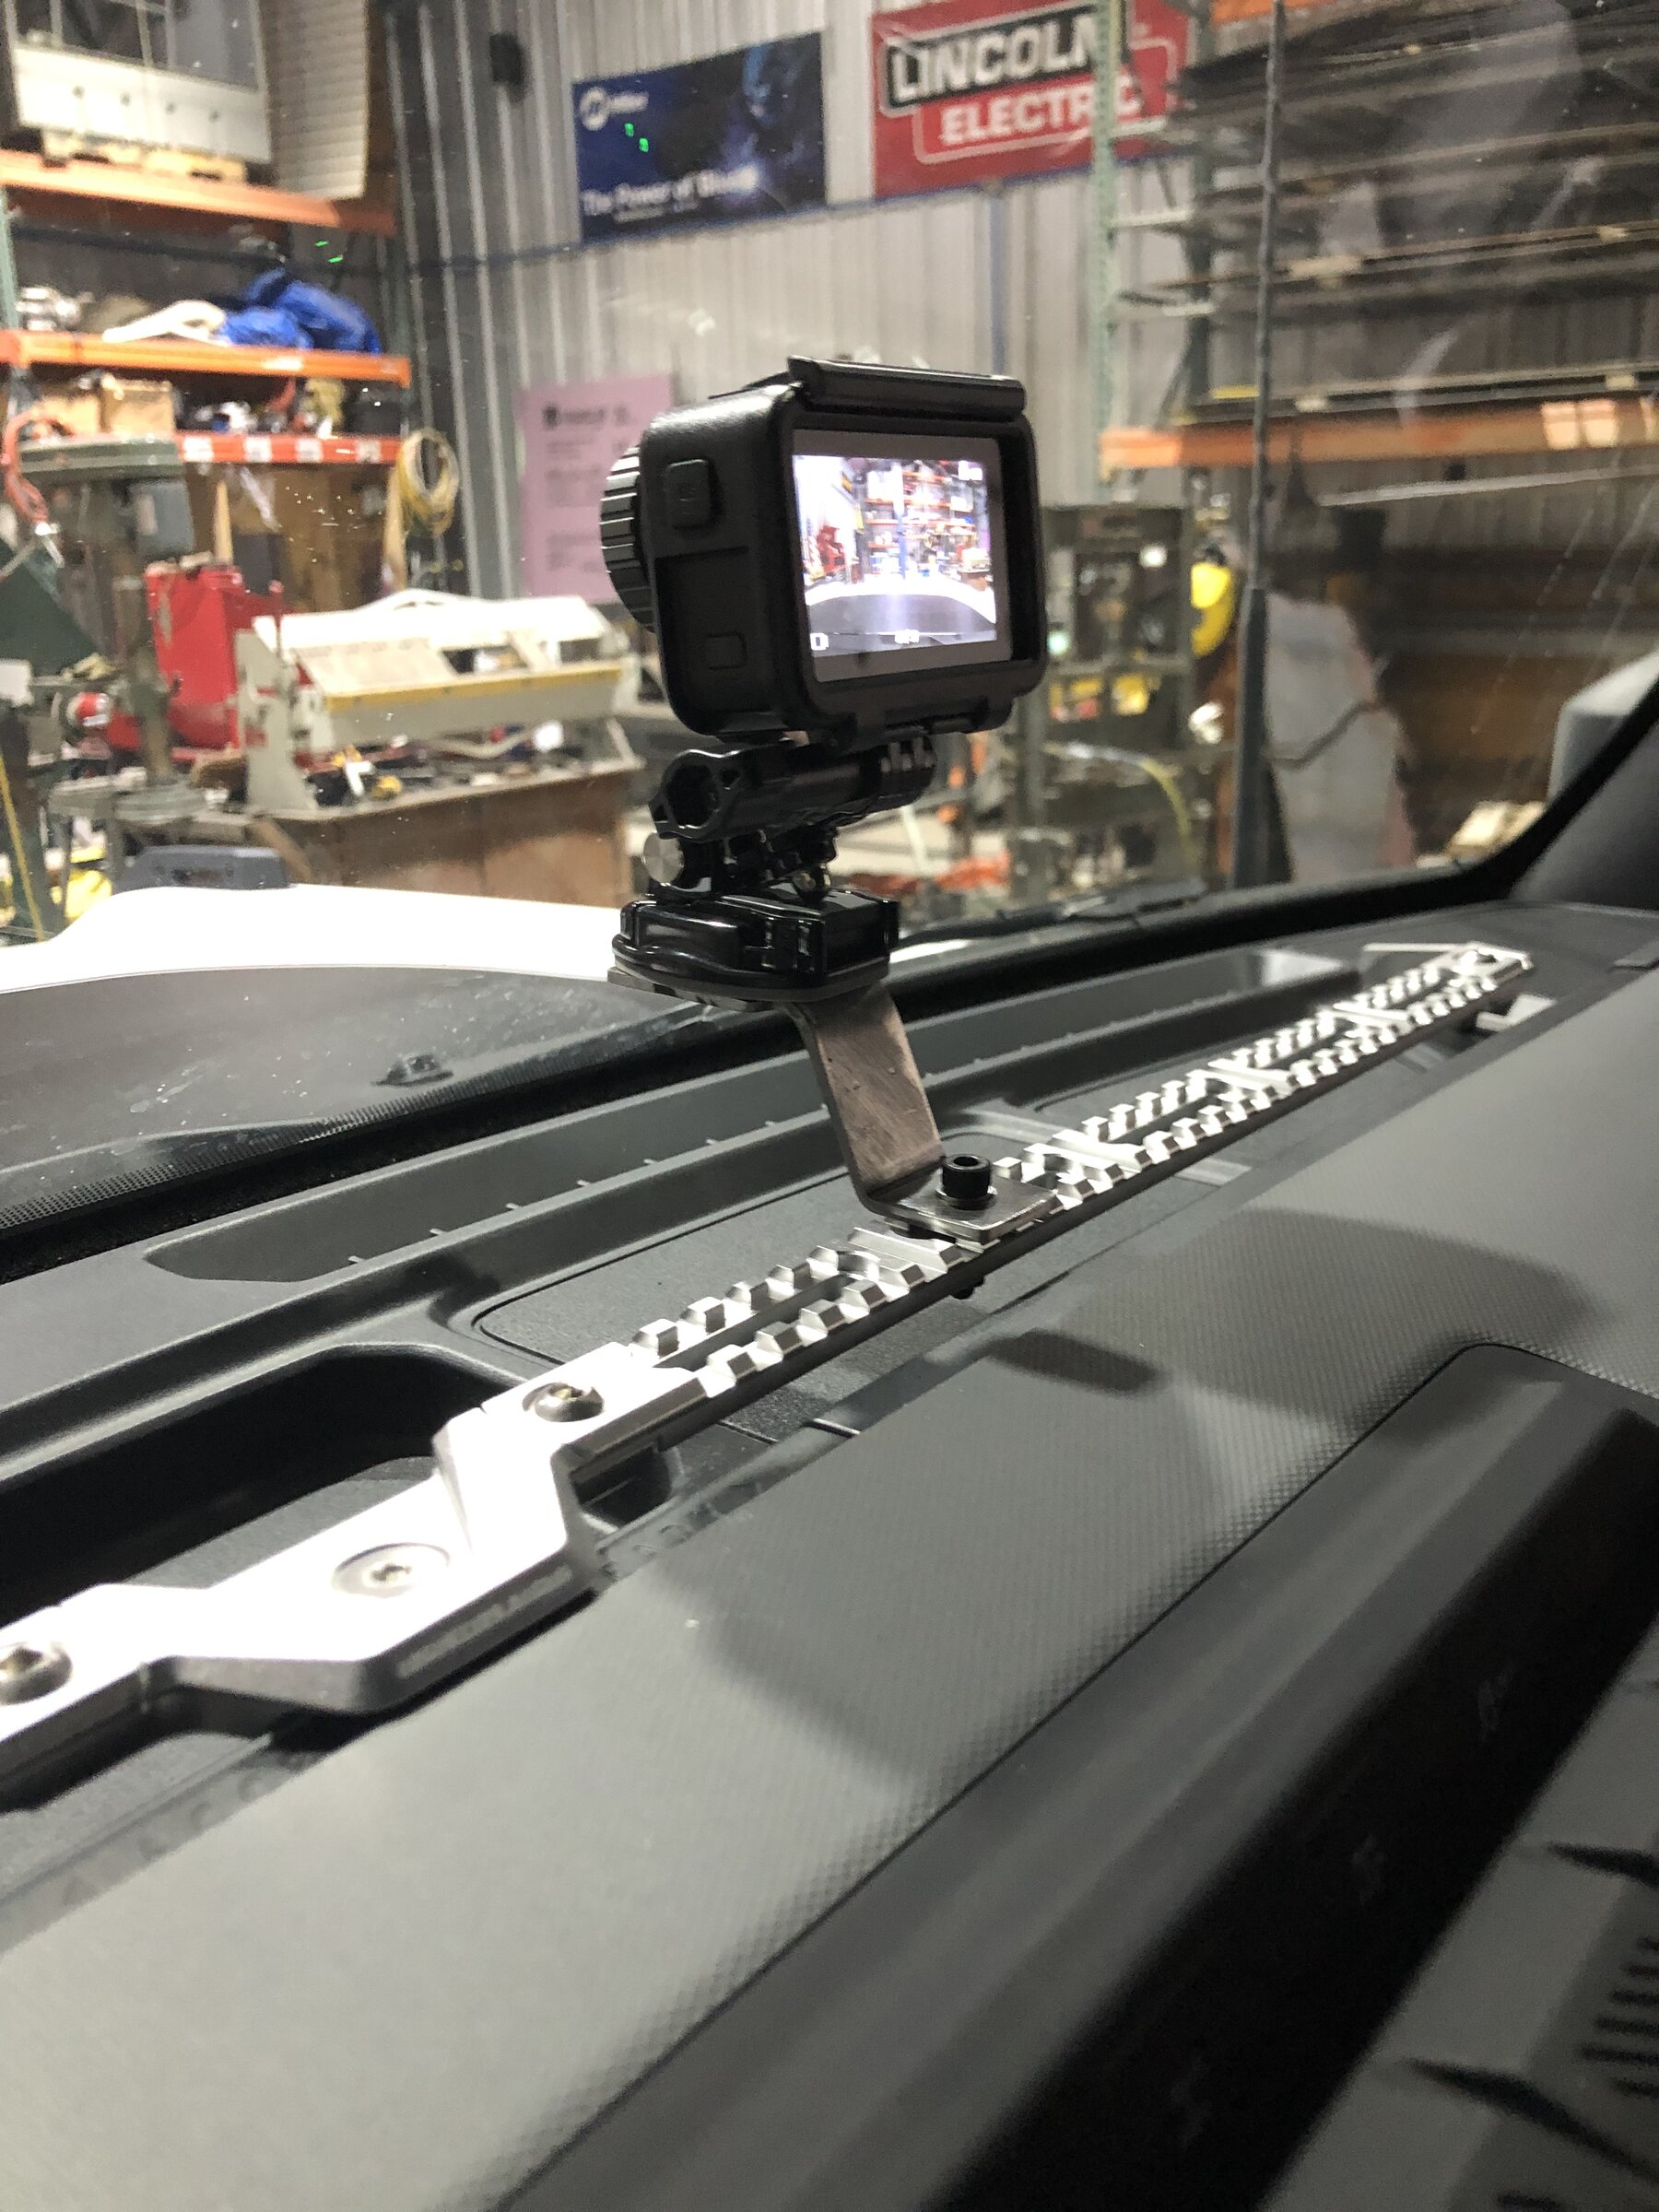 Ford Bronco ARCHETYPE RACING | BAM-BYODR (Billet Aluminum Modular Bring Your Own Device Rail) 70F2796F-E716-4B6D-BD73-F9A2341D6C5E